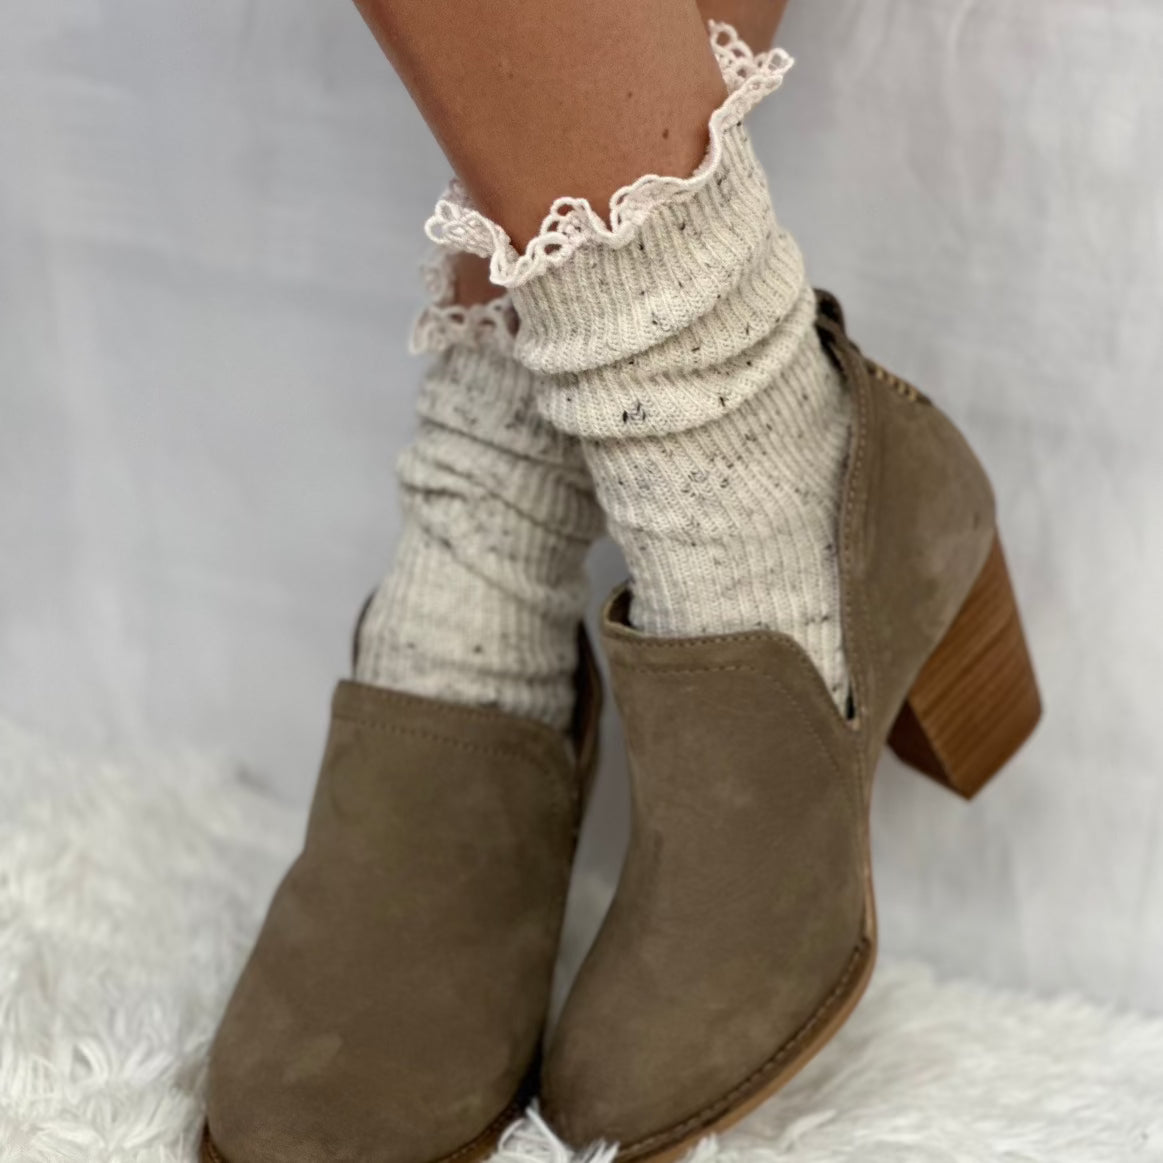 Cute lace ankle socks for short boots women, best quality socks for booties boots women